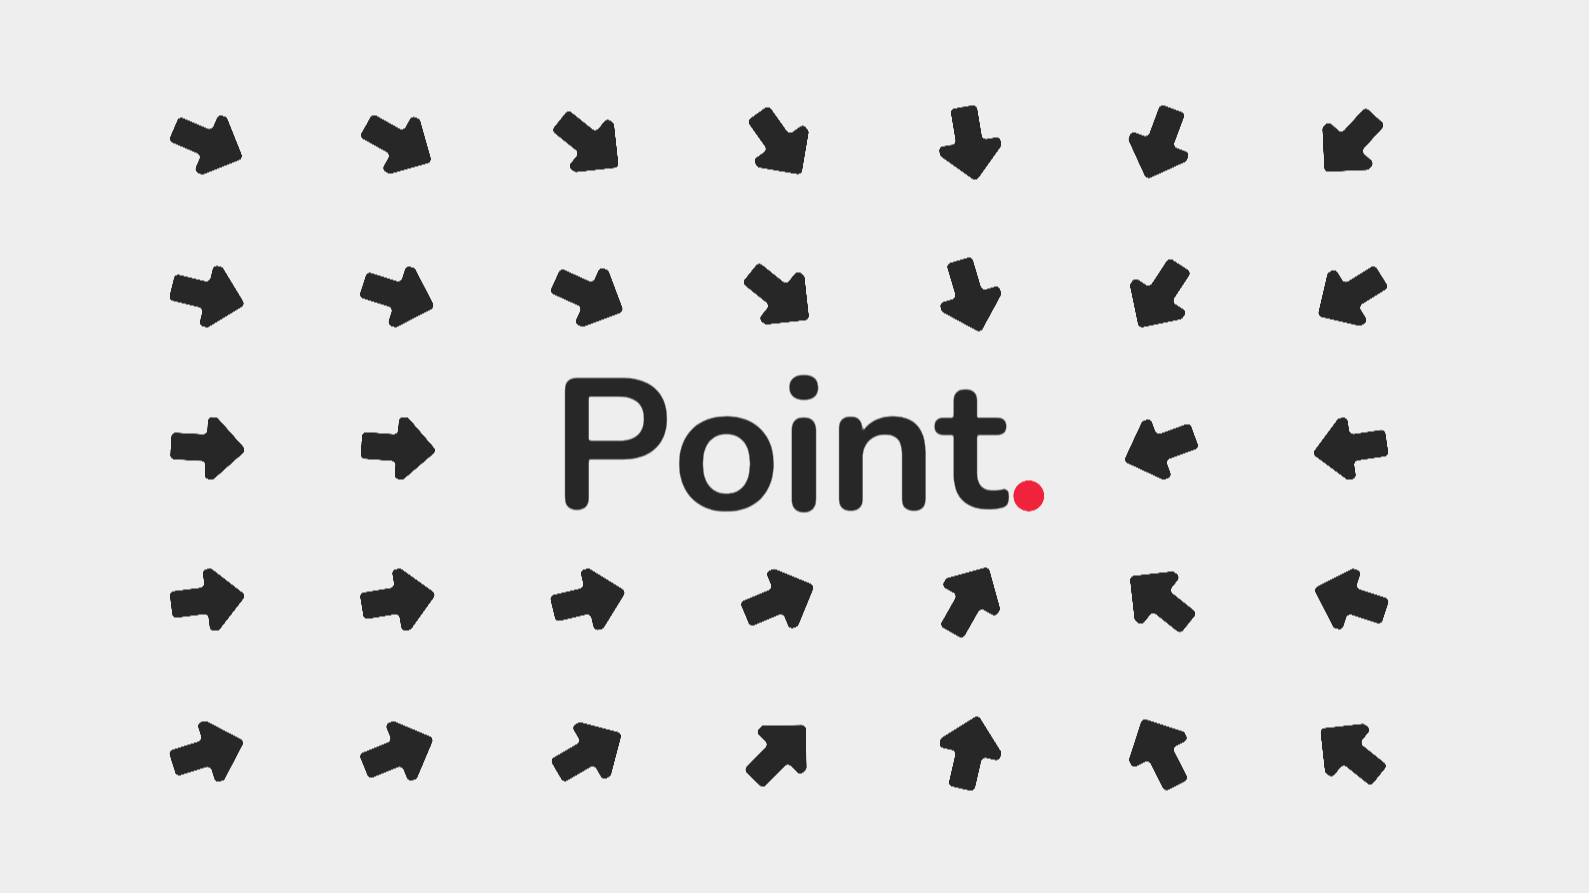 Point. Game Image